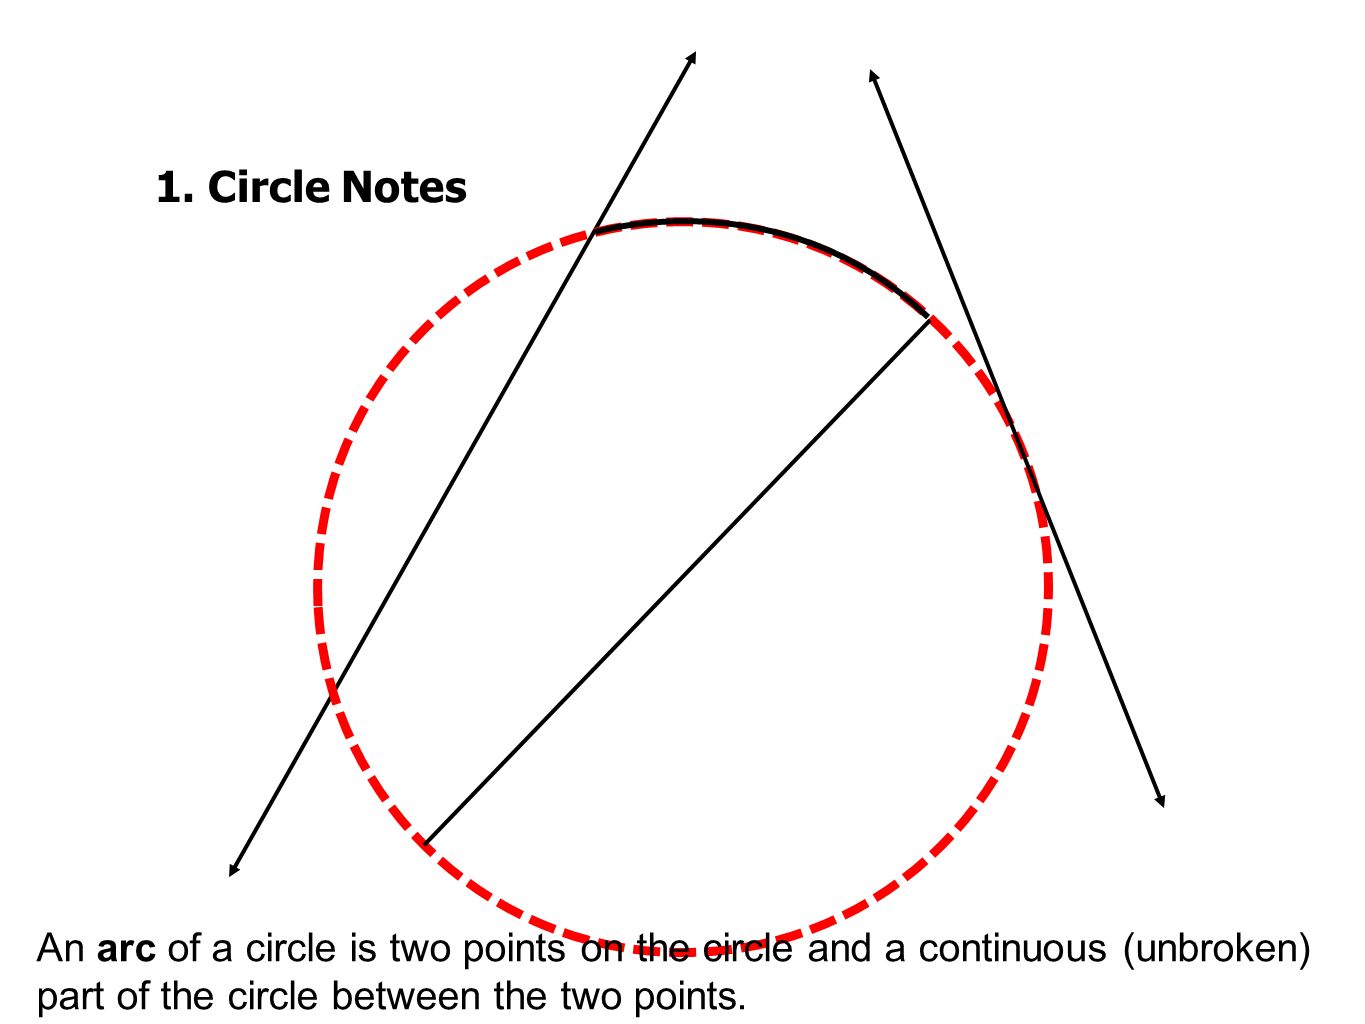 1. Circle Notes An arc of a circle is two points on the circle and a continuous (unbroken) part of the circle between the two points.